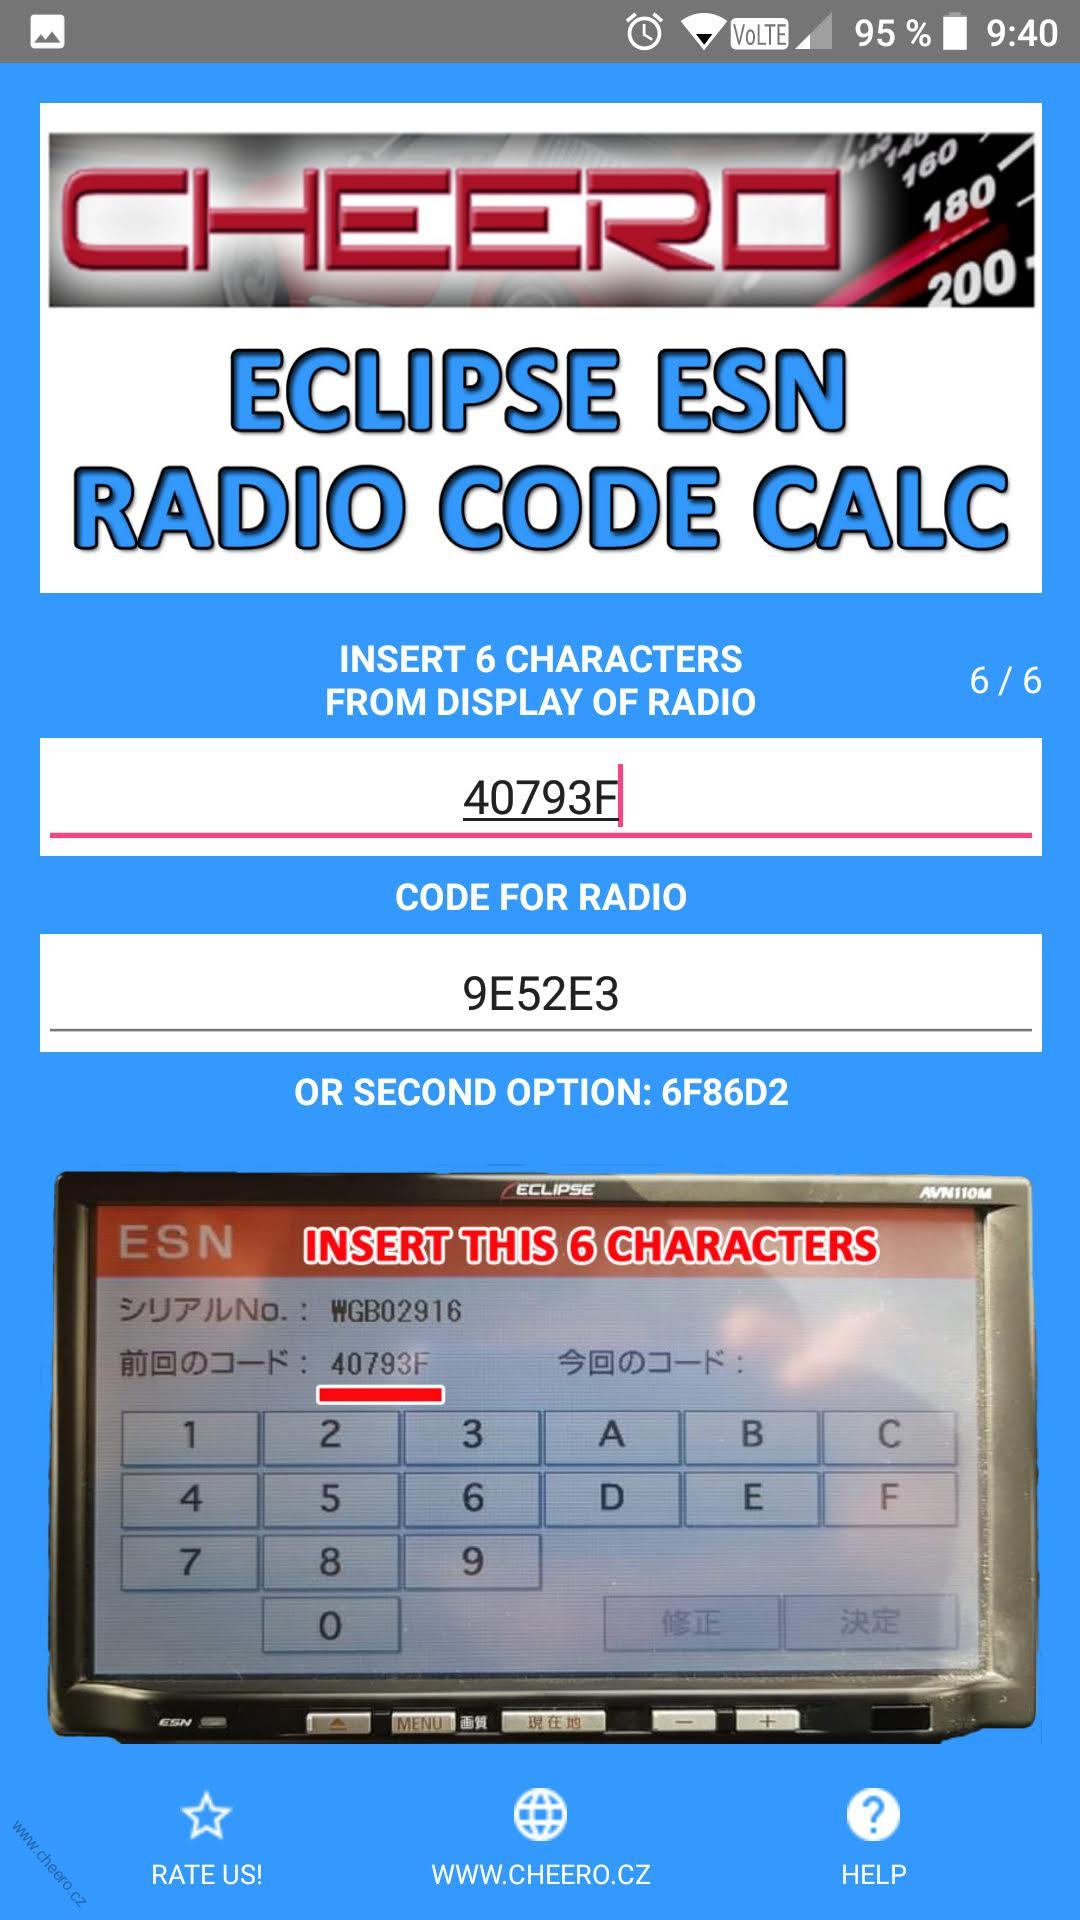 RADIO CODE FOR ECLIPSE ESN NAVIGATION - UNLOCK CODE FOR JAPANESE CAR DVD UNITS